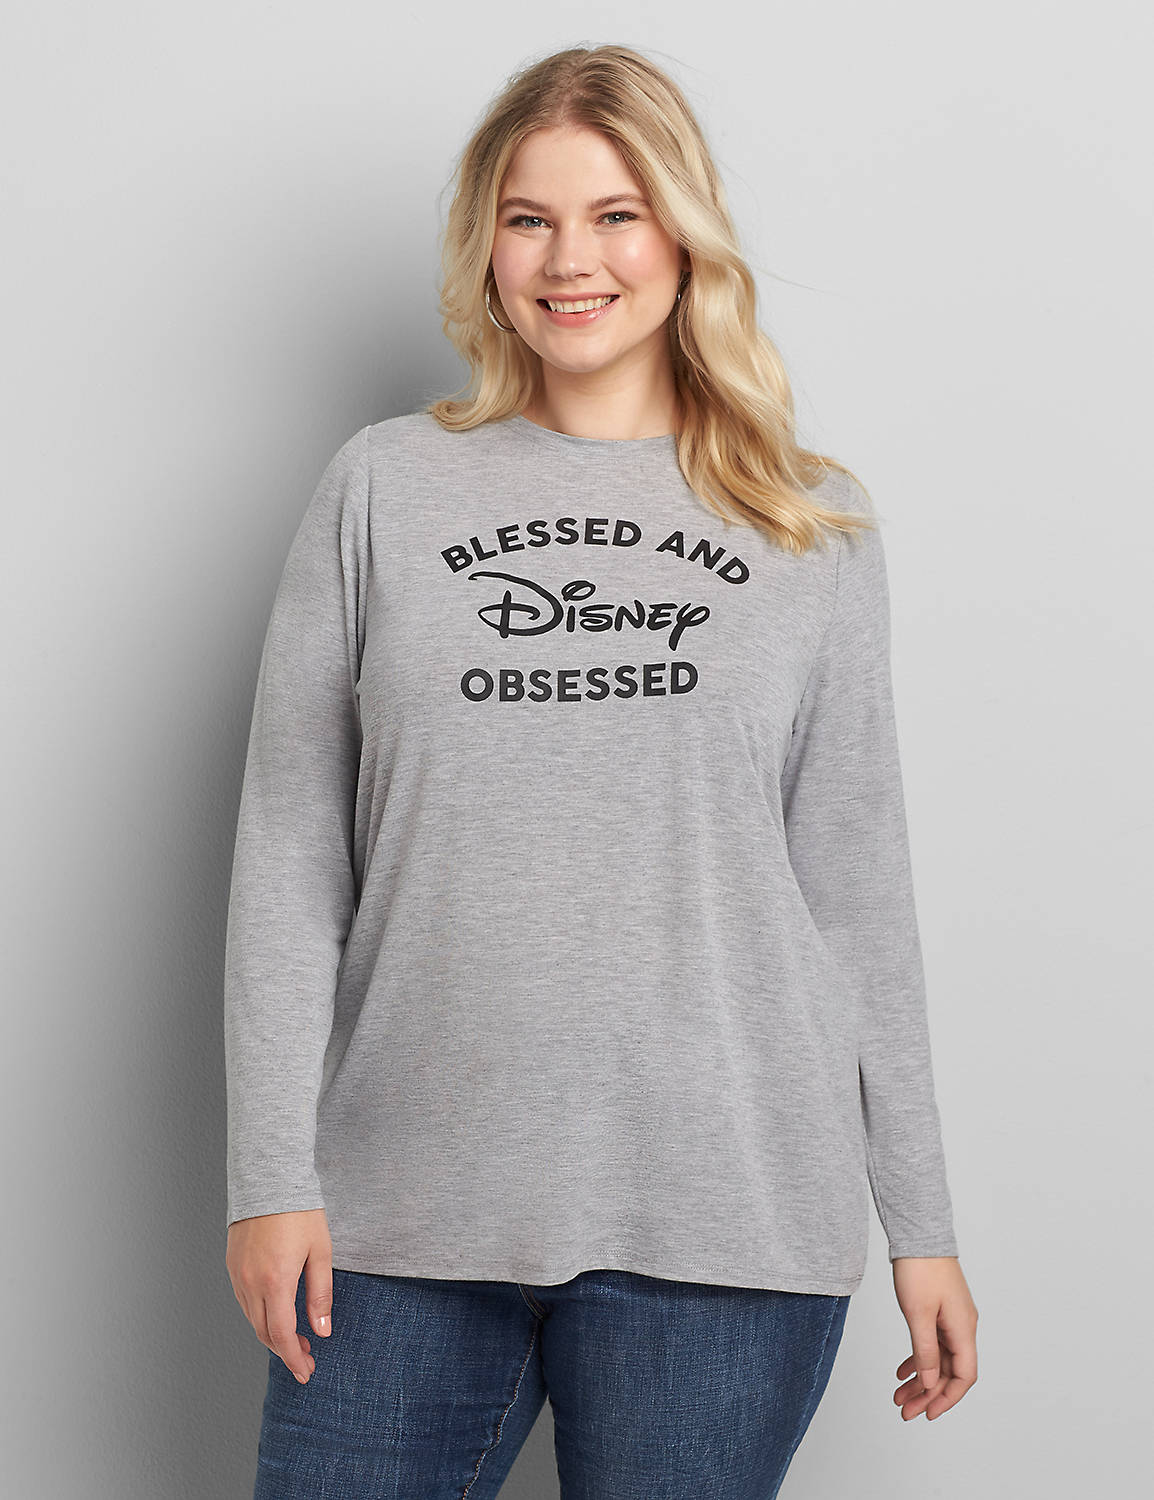 Long Sleeve Crew Neck Pullover Graphic: Blessed and Disney Obsessed 1118123:BTC30 Medium Heather Gray:18/20 Product Image 1